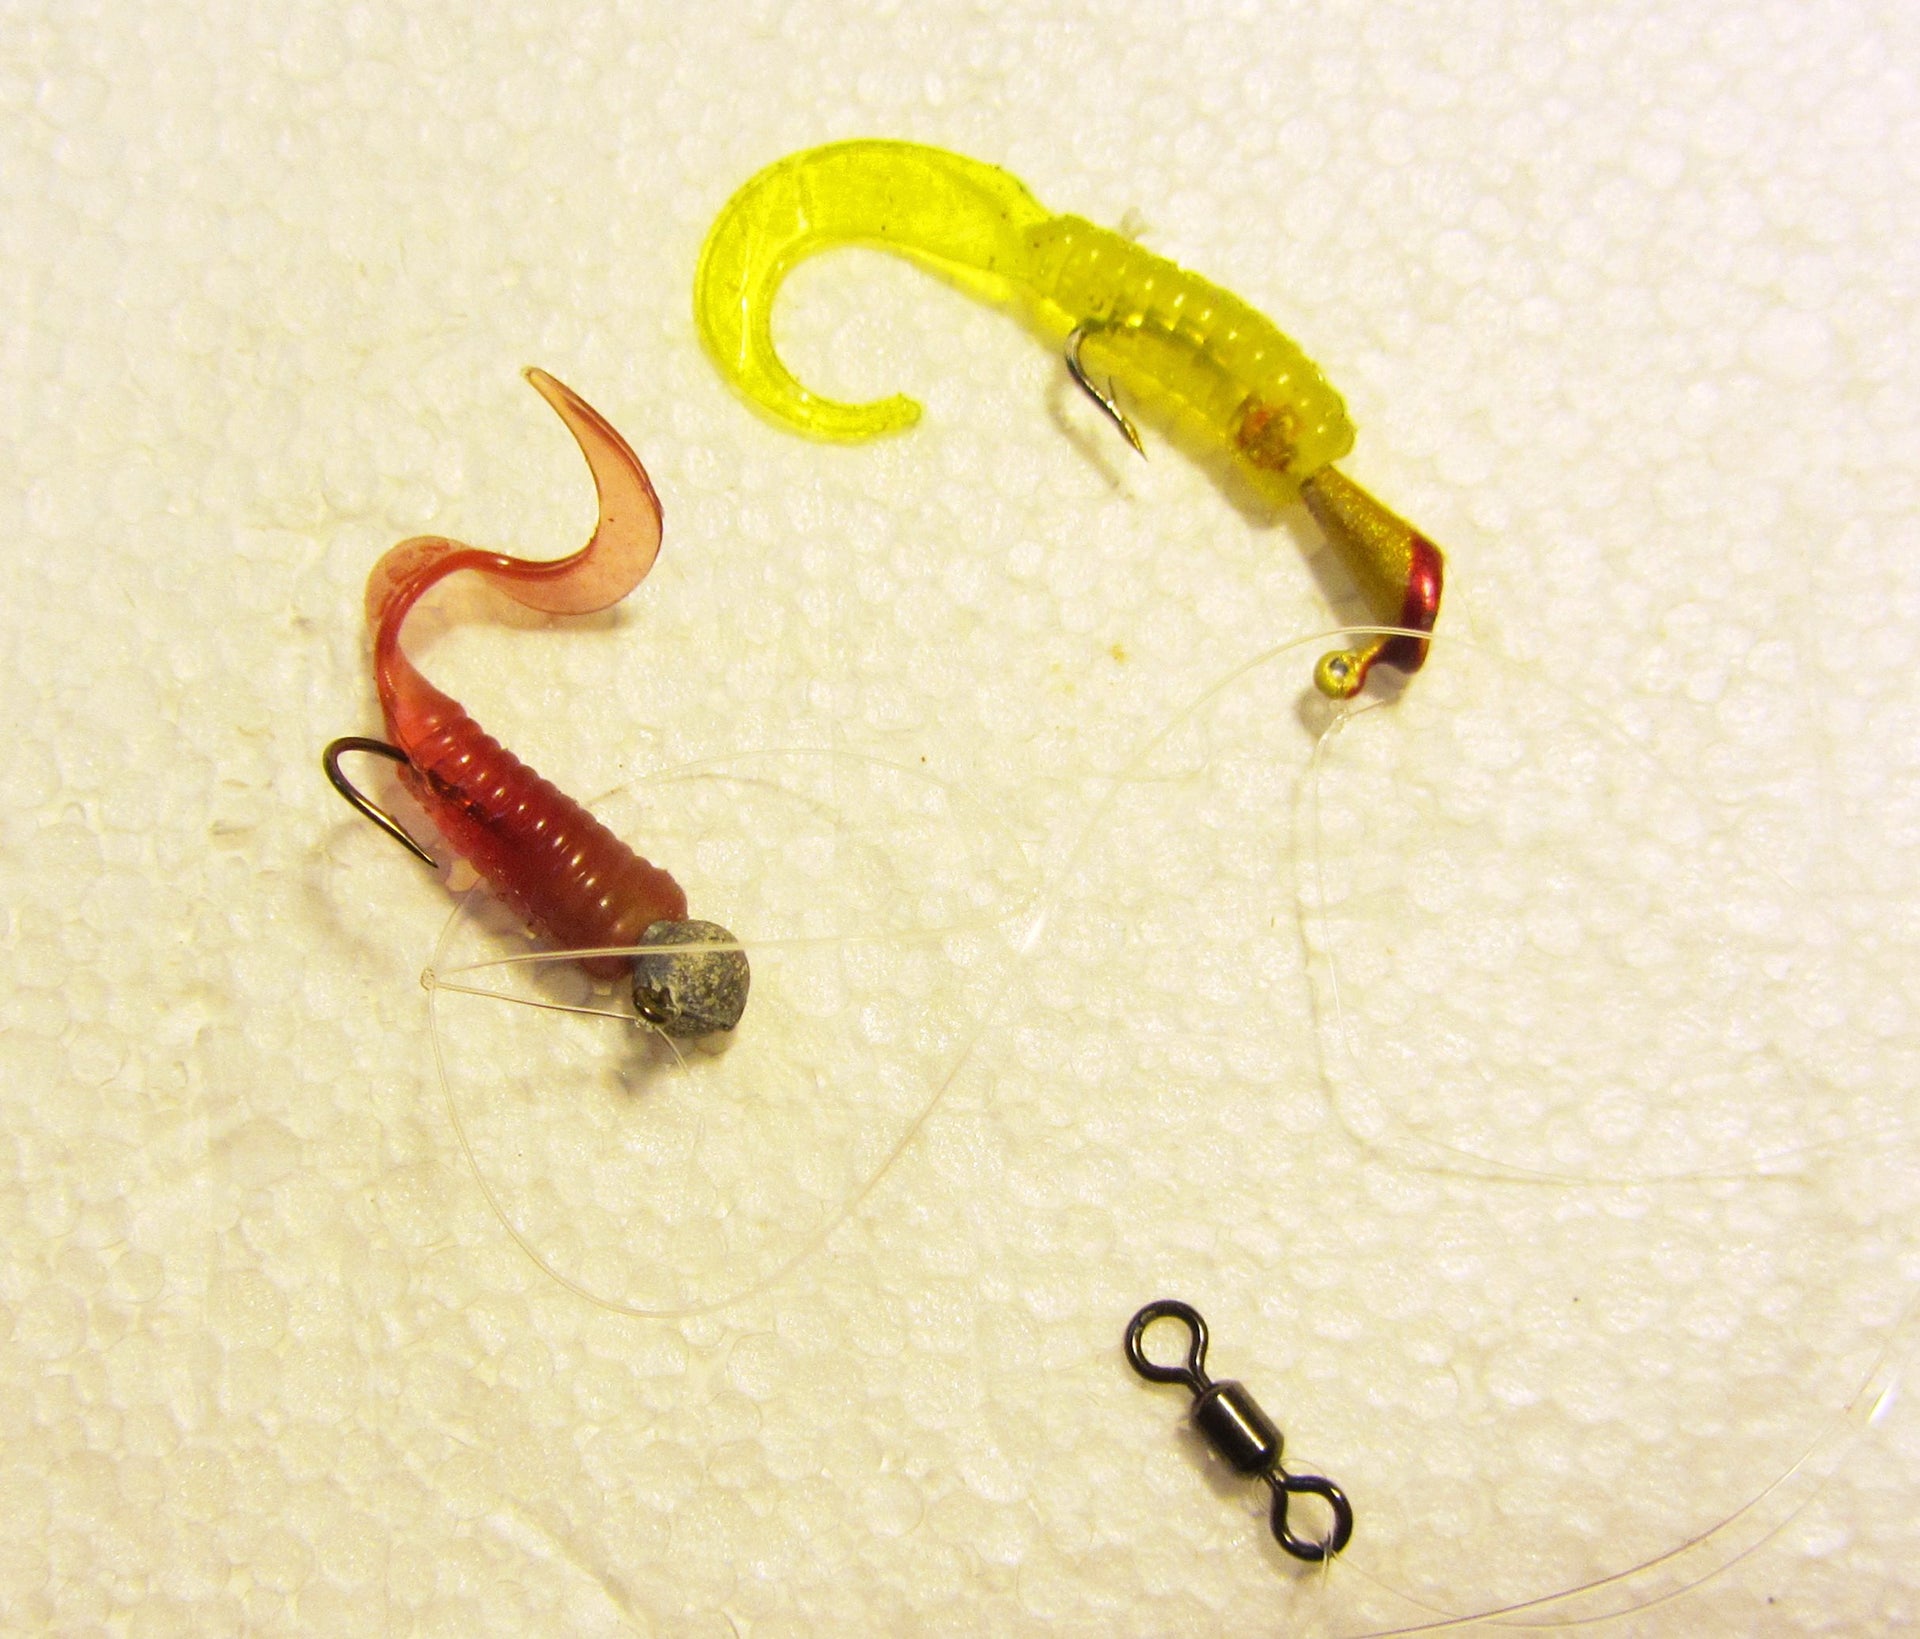 Some new small plastics for panfish